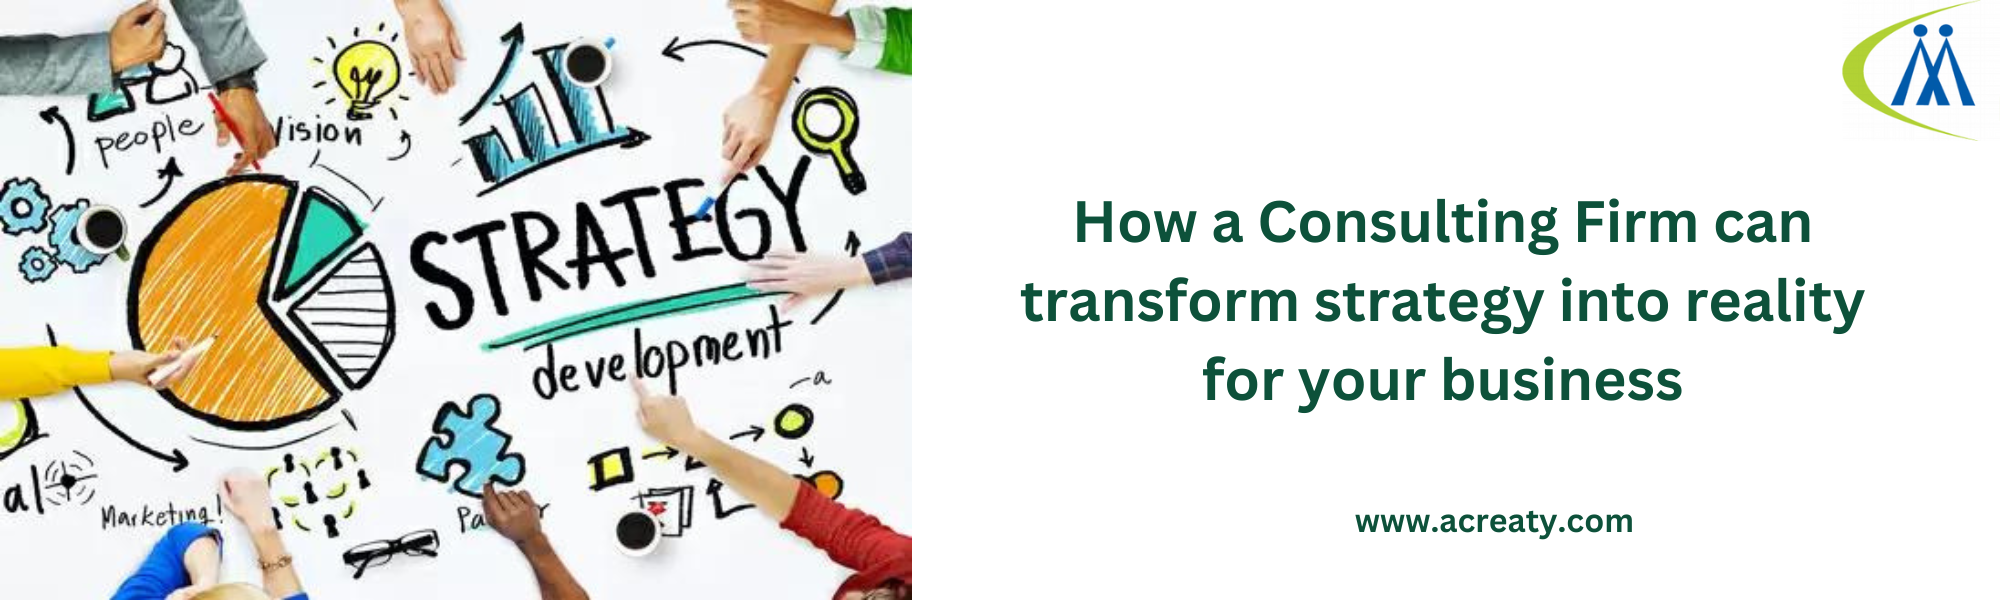 How a Consulting Firm can transform strategy into reality for your business